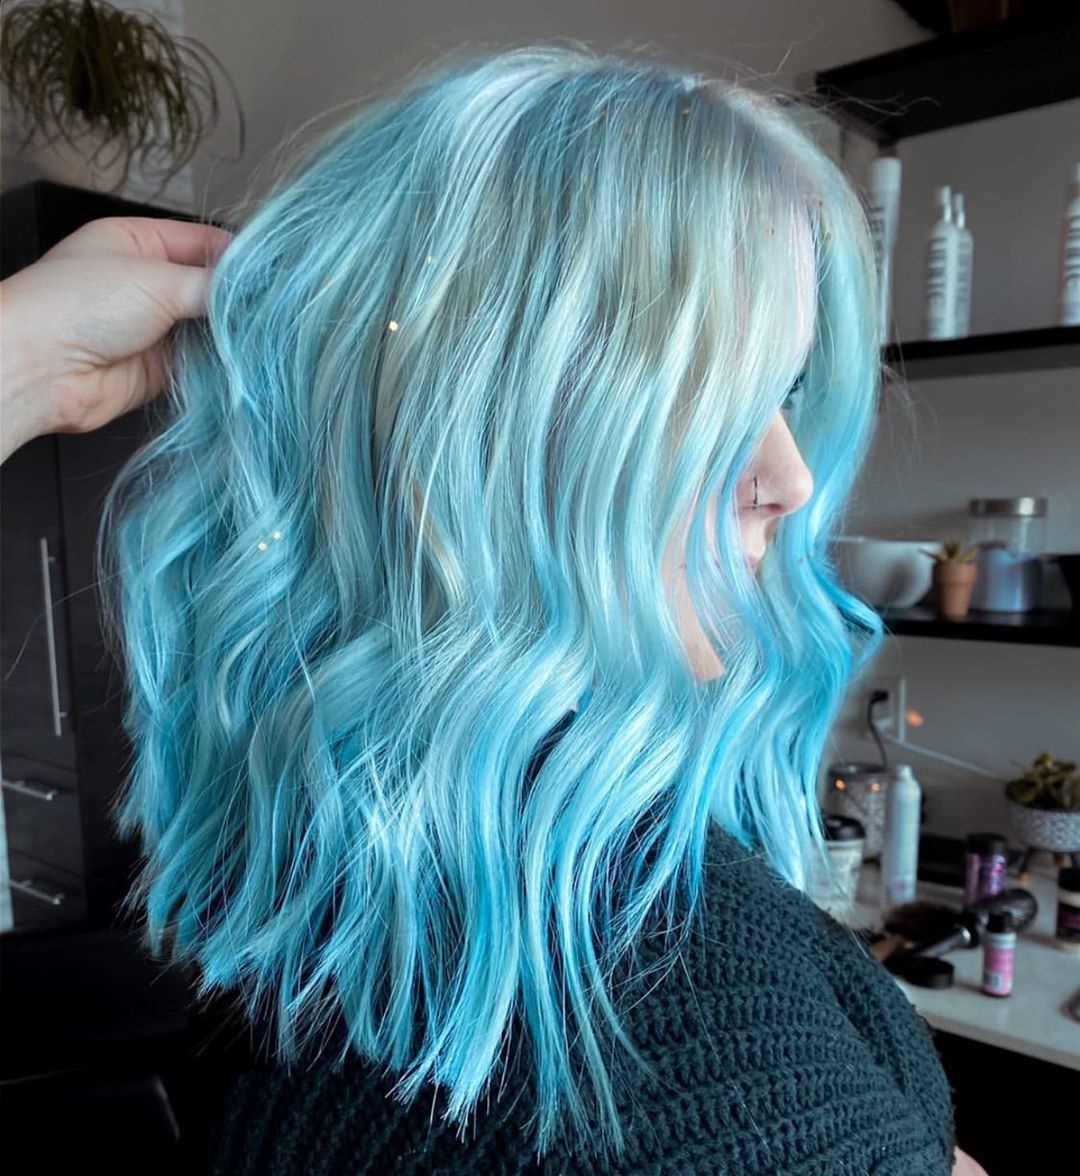 Gorgeous Blue Hair Color Ideas - Inspired By The Instagrammers - Find ...